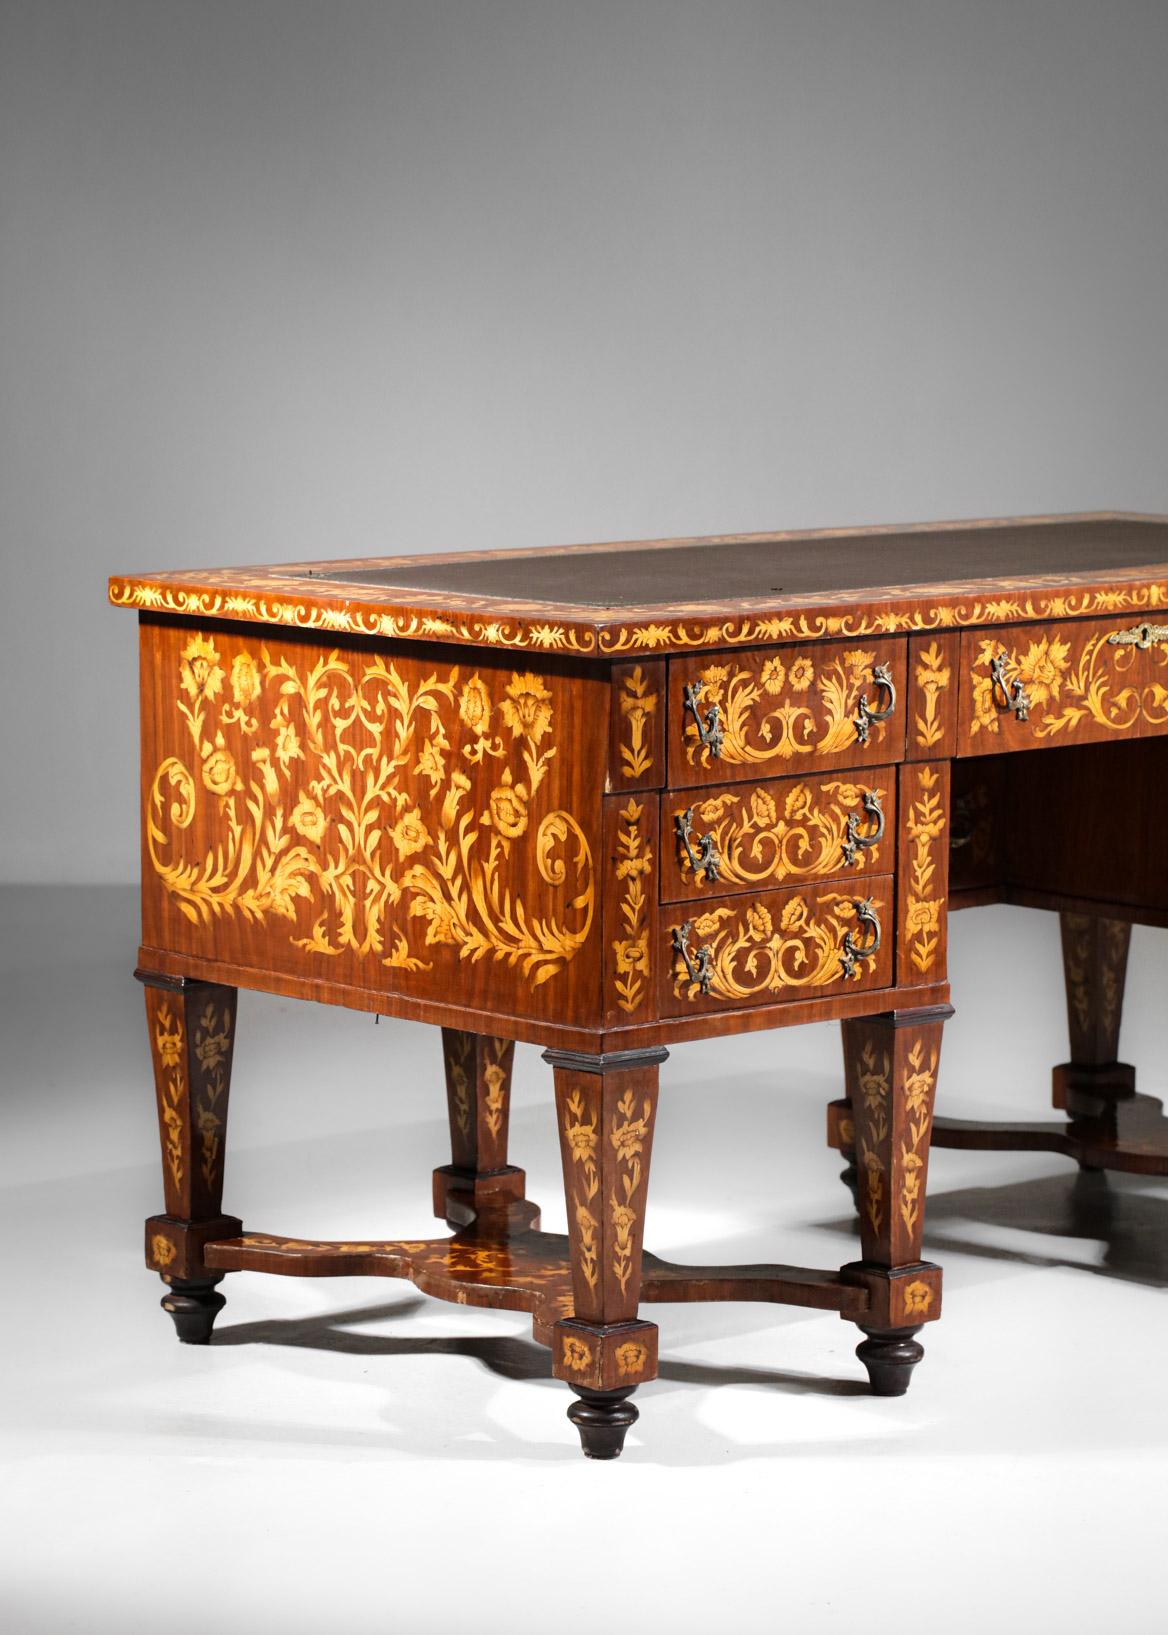 Mazarin Style Desk in Solid Wood and Floral Marquetry, F419 3